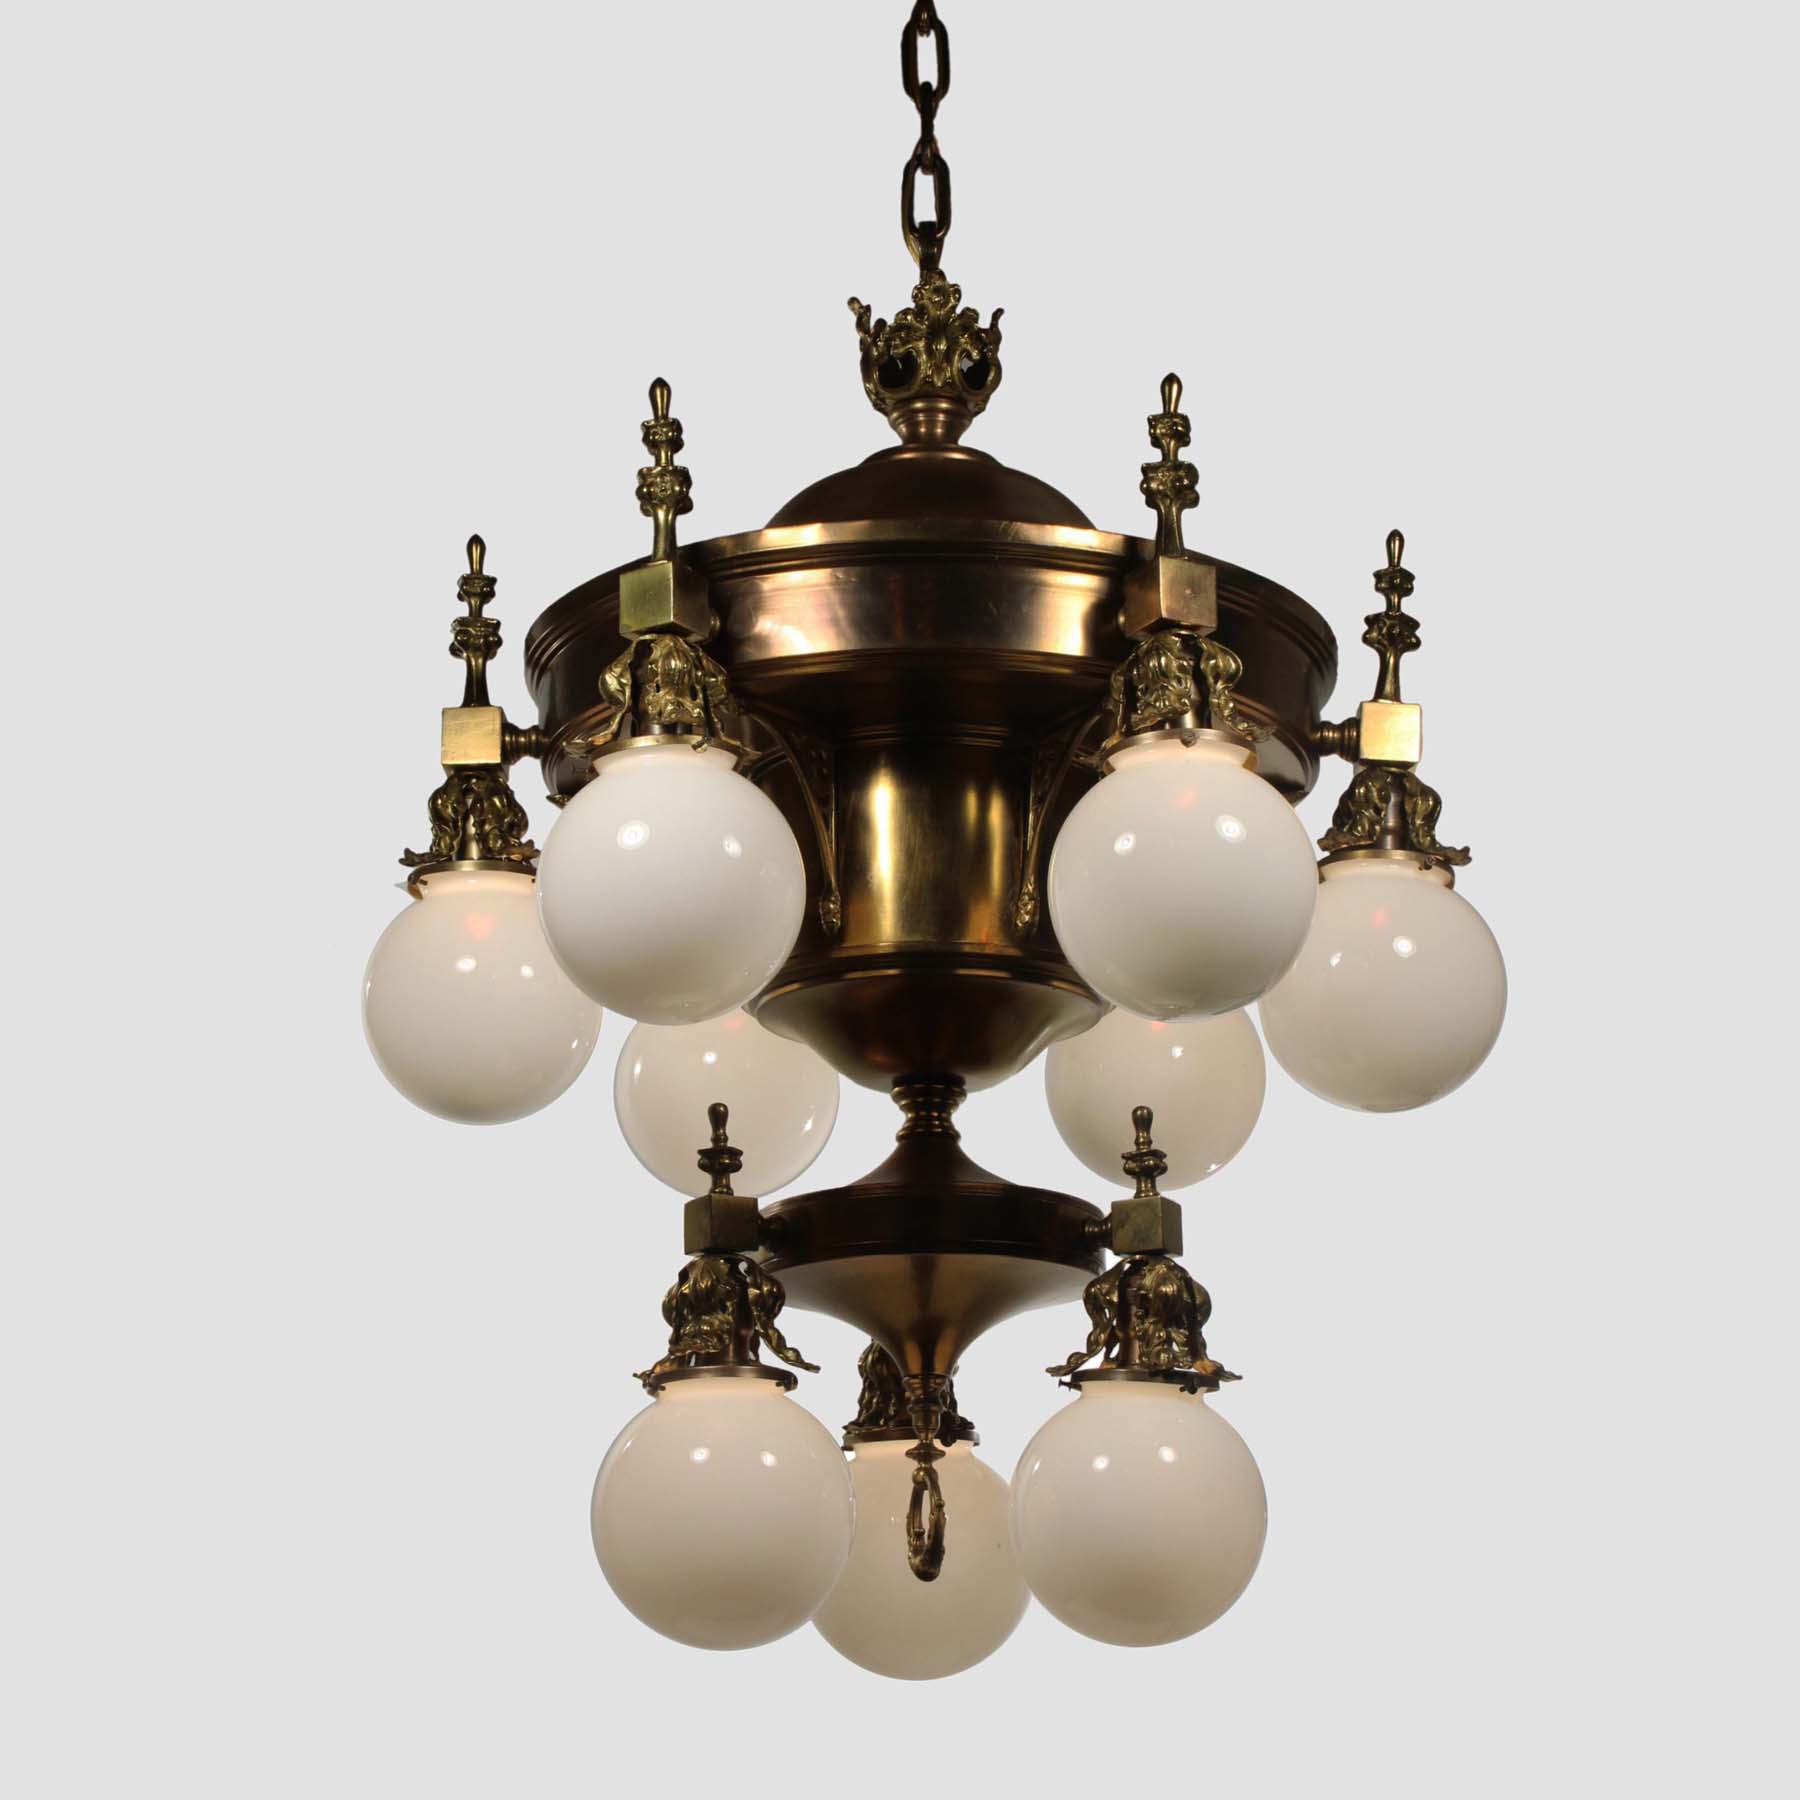 SOLD Substantial Antique Brass Chandelier with Ball Shades-67600